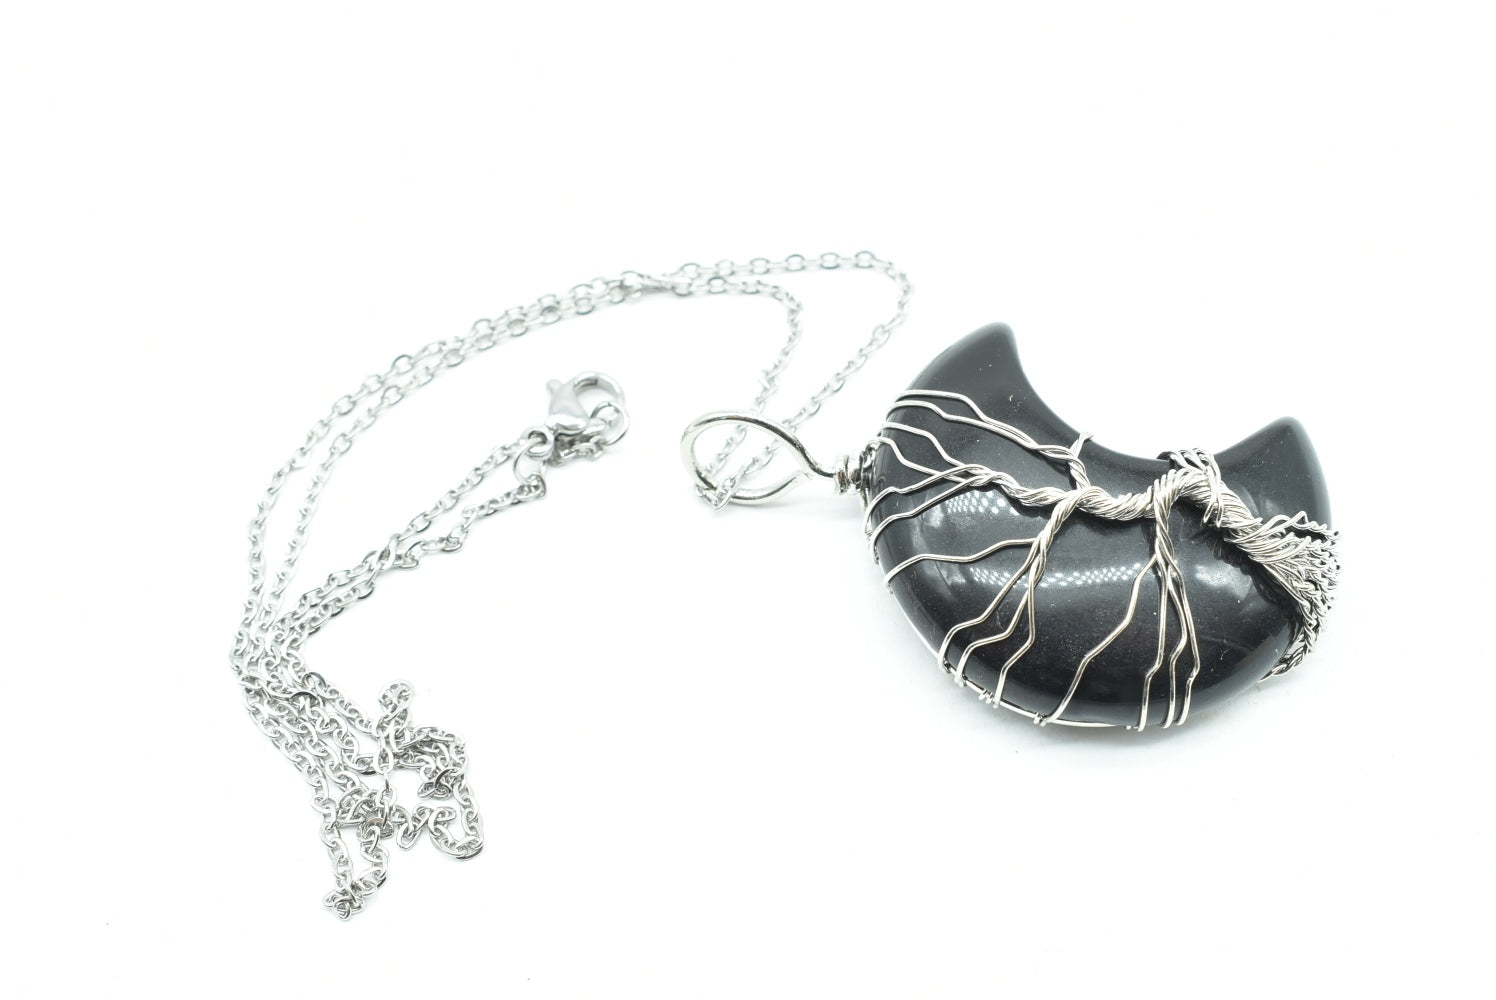 Obsidian Moon Pendant wrapped in silver colored wire